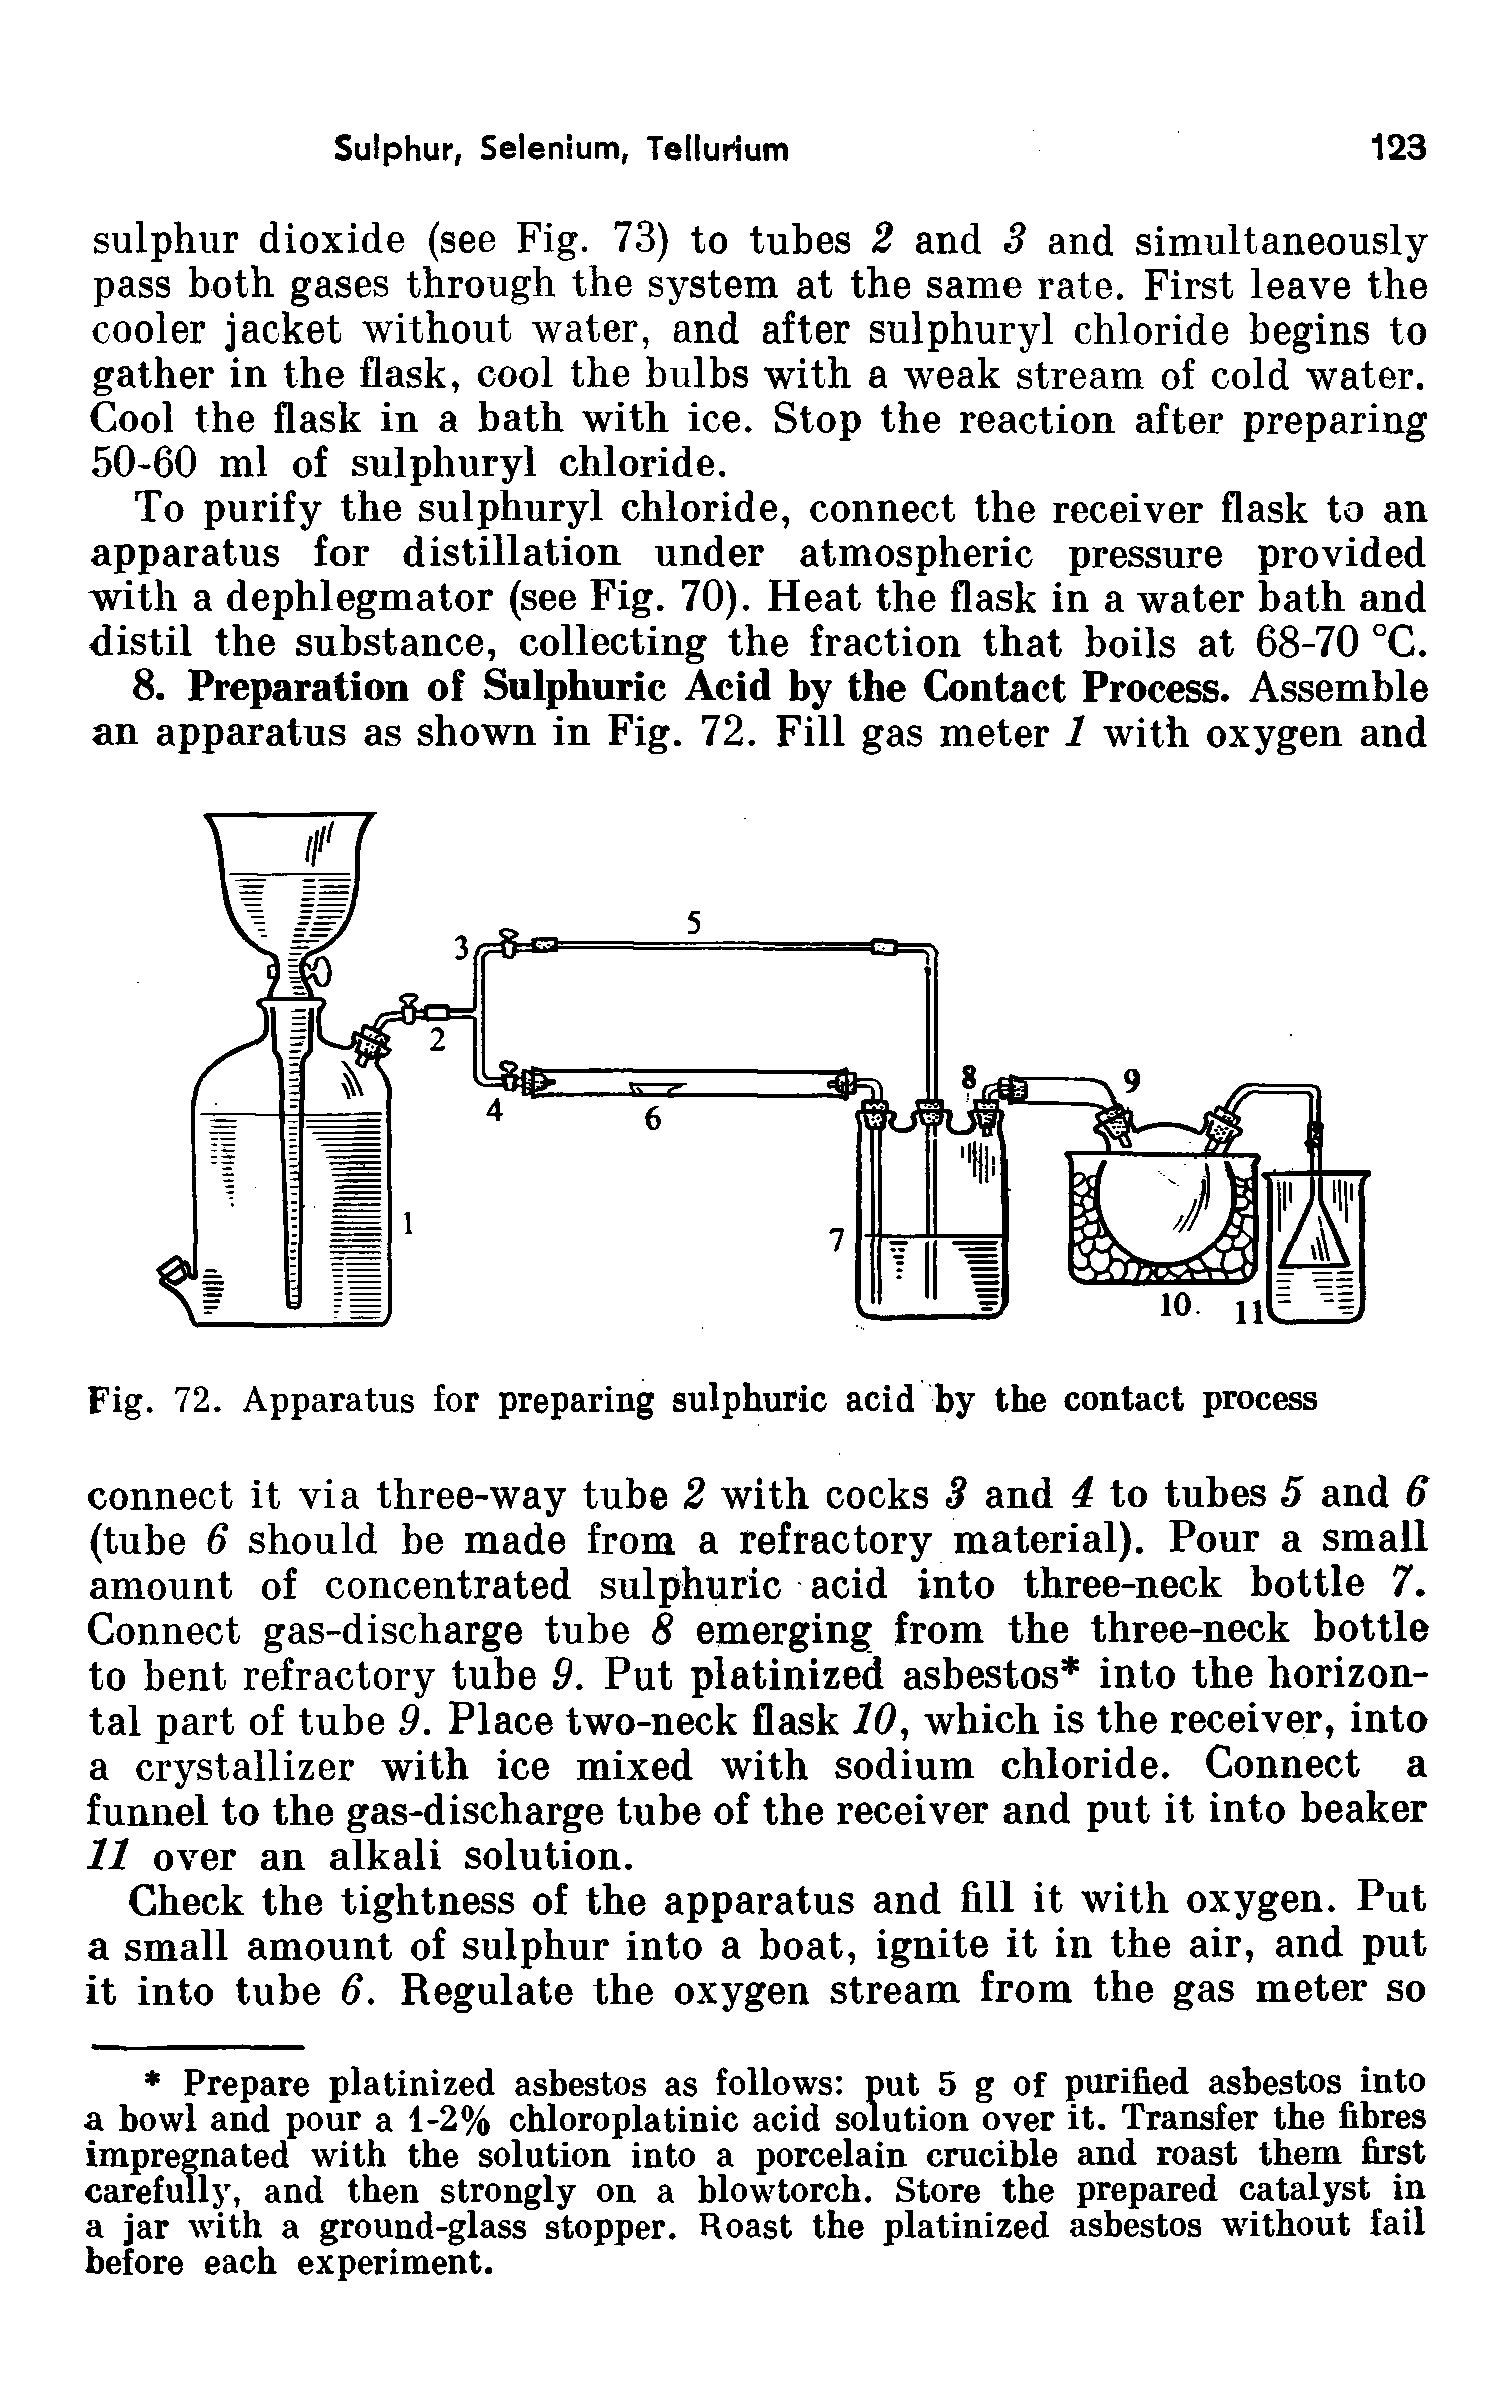 Fig. 72. Apparatus for preparing sulphuric acid by the contact process...